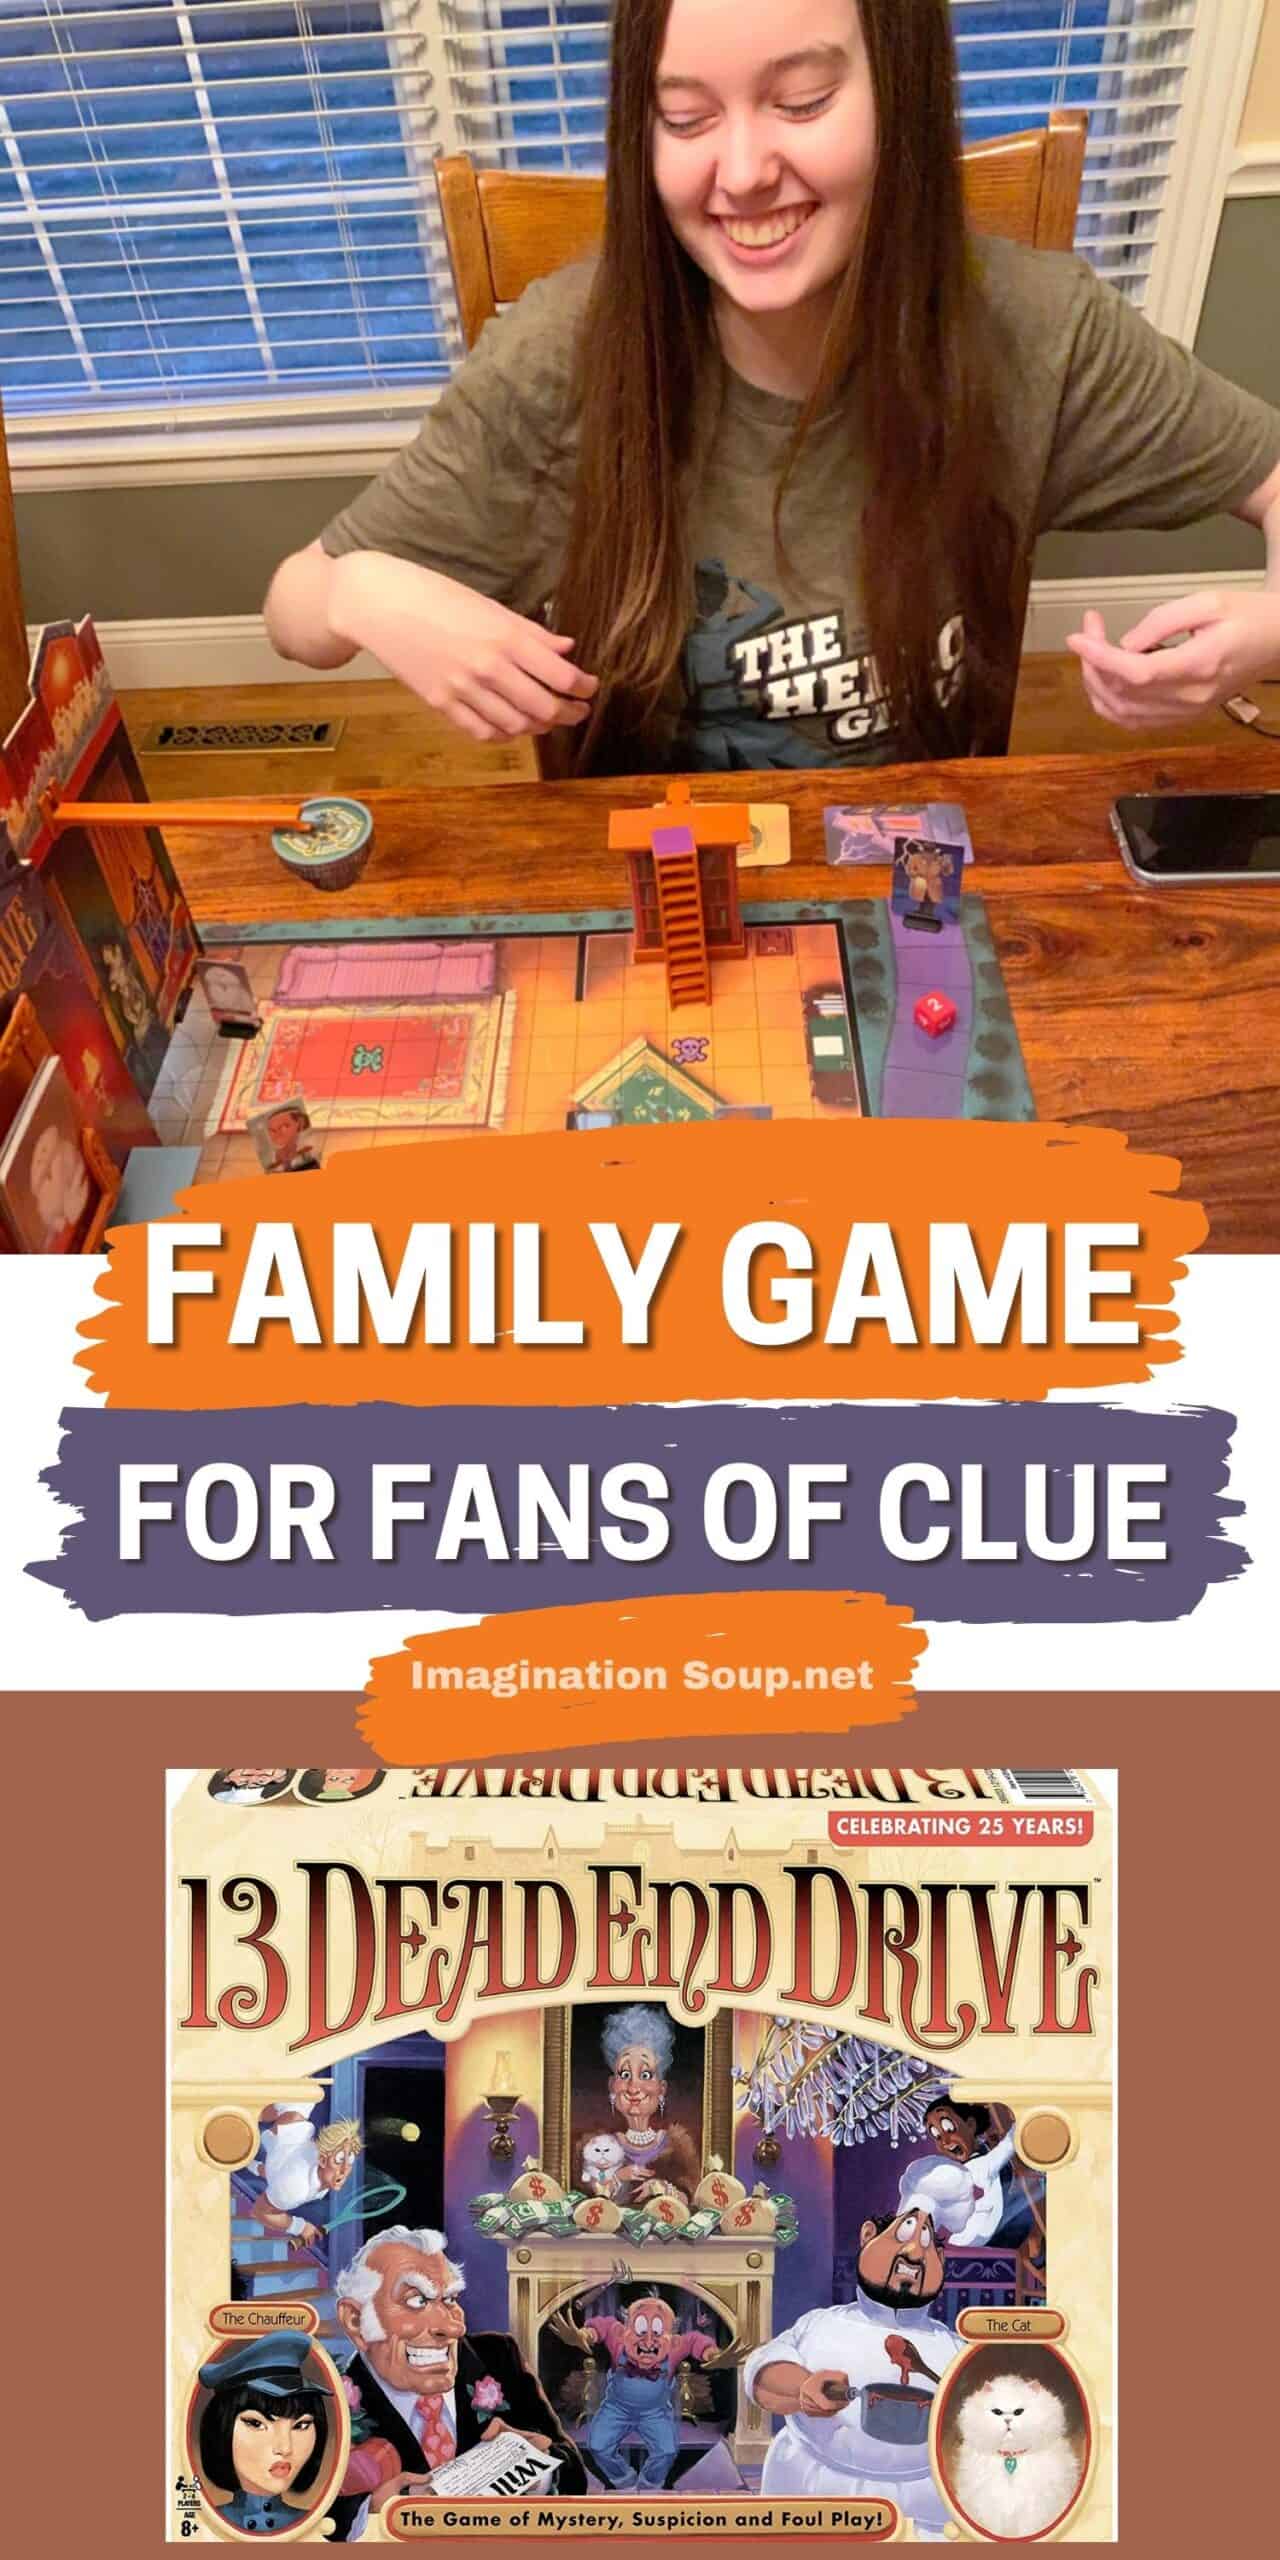 13 DEAD END DRIVE FAMILY GAME